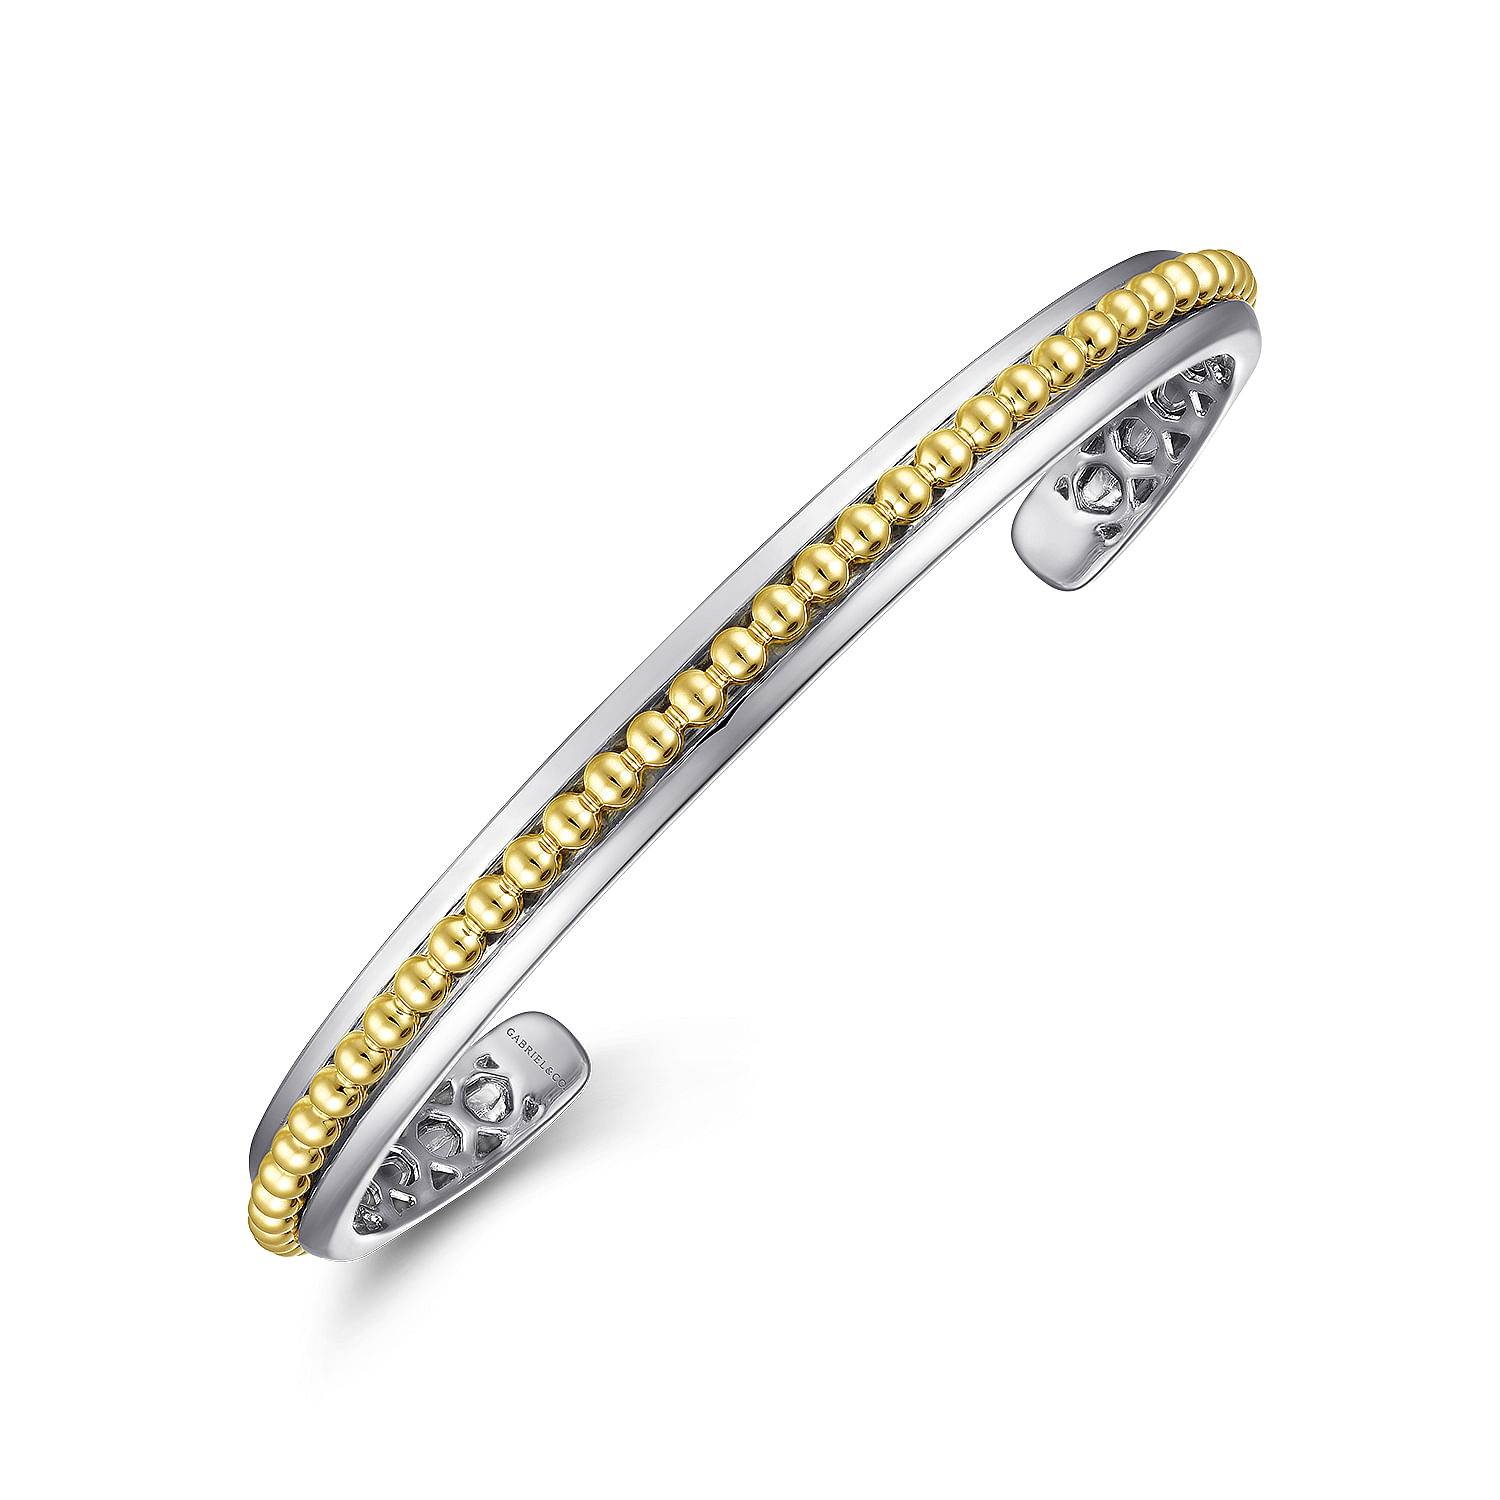 Sterling Silver Open Cuff Bracelet with 14K Yellow Gold Beads